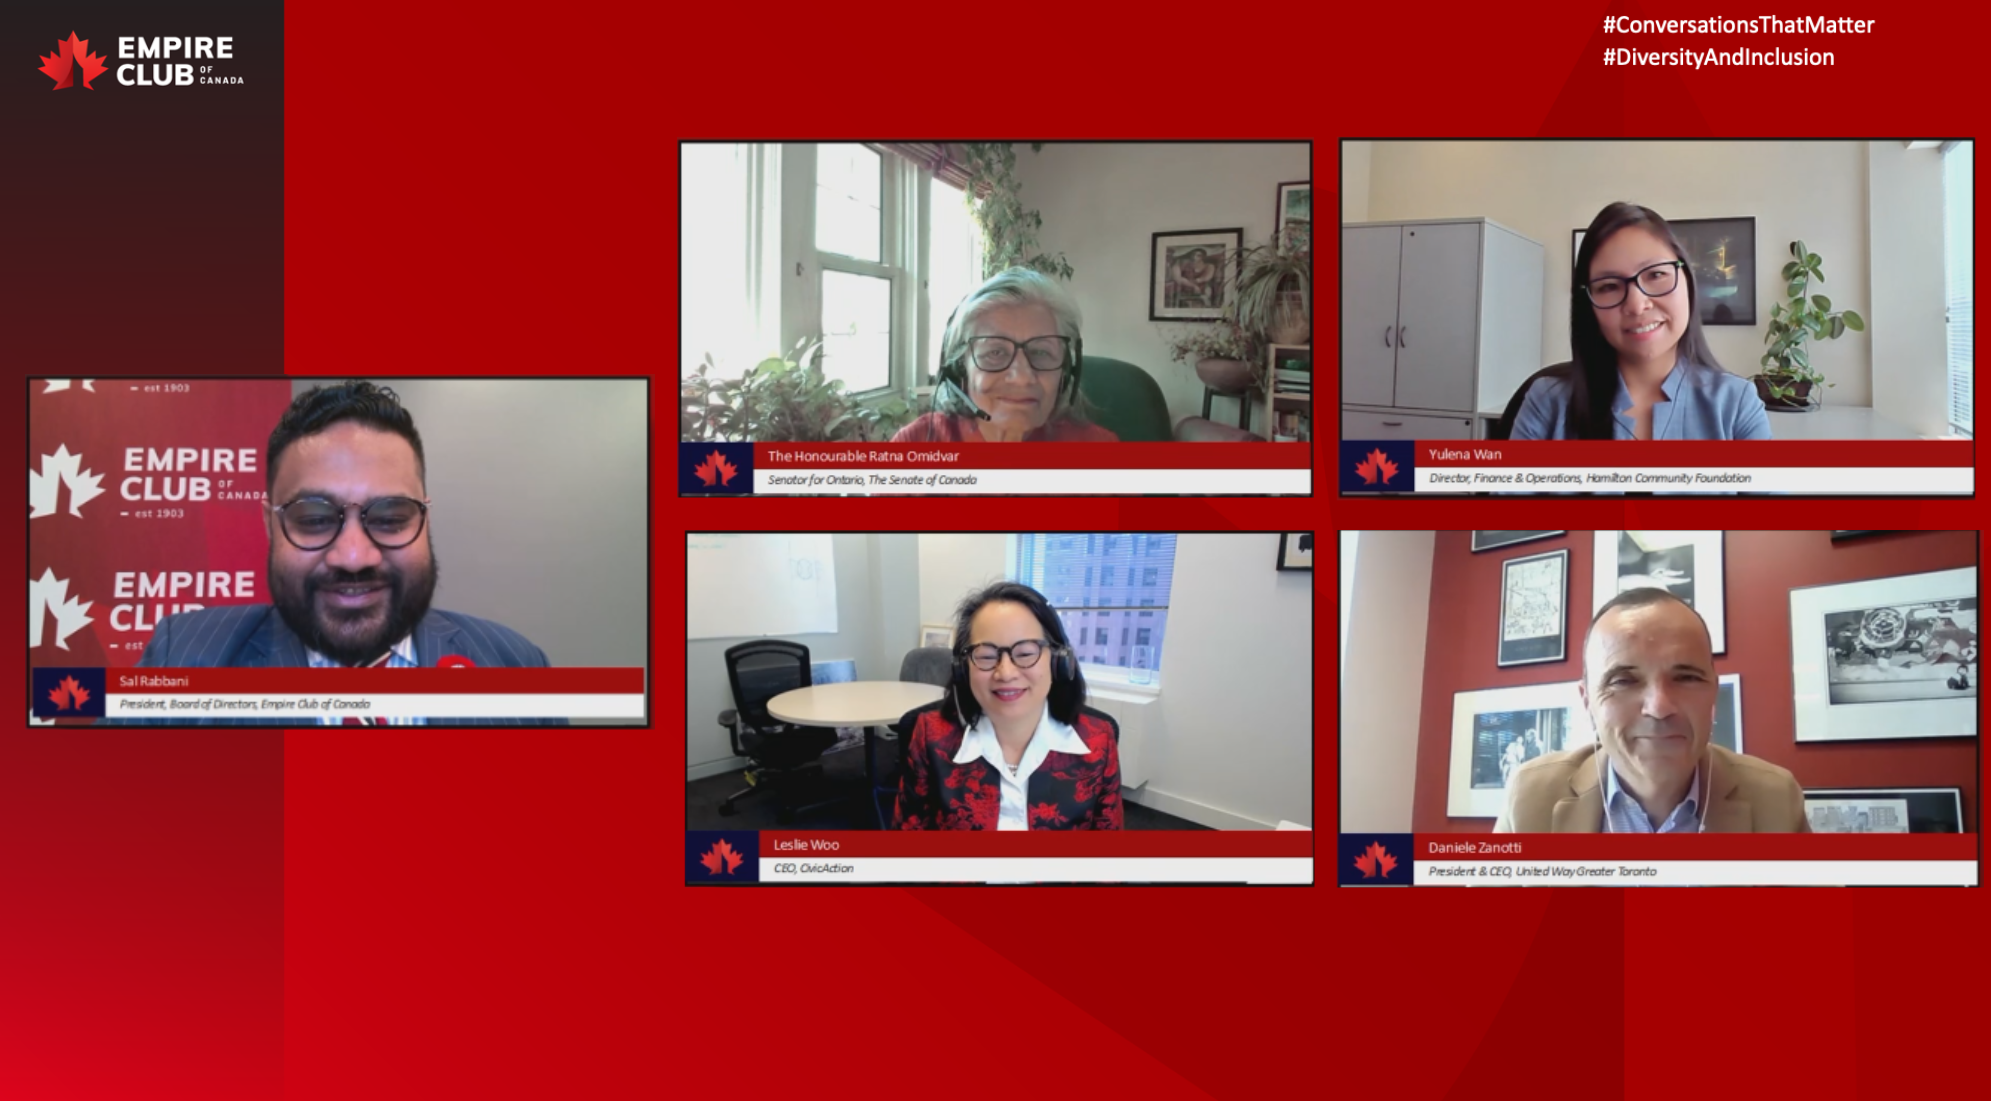 Five panelilists participating at a virtual panel discussion